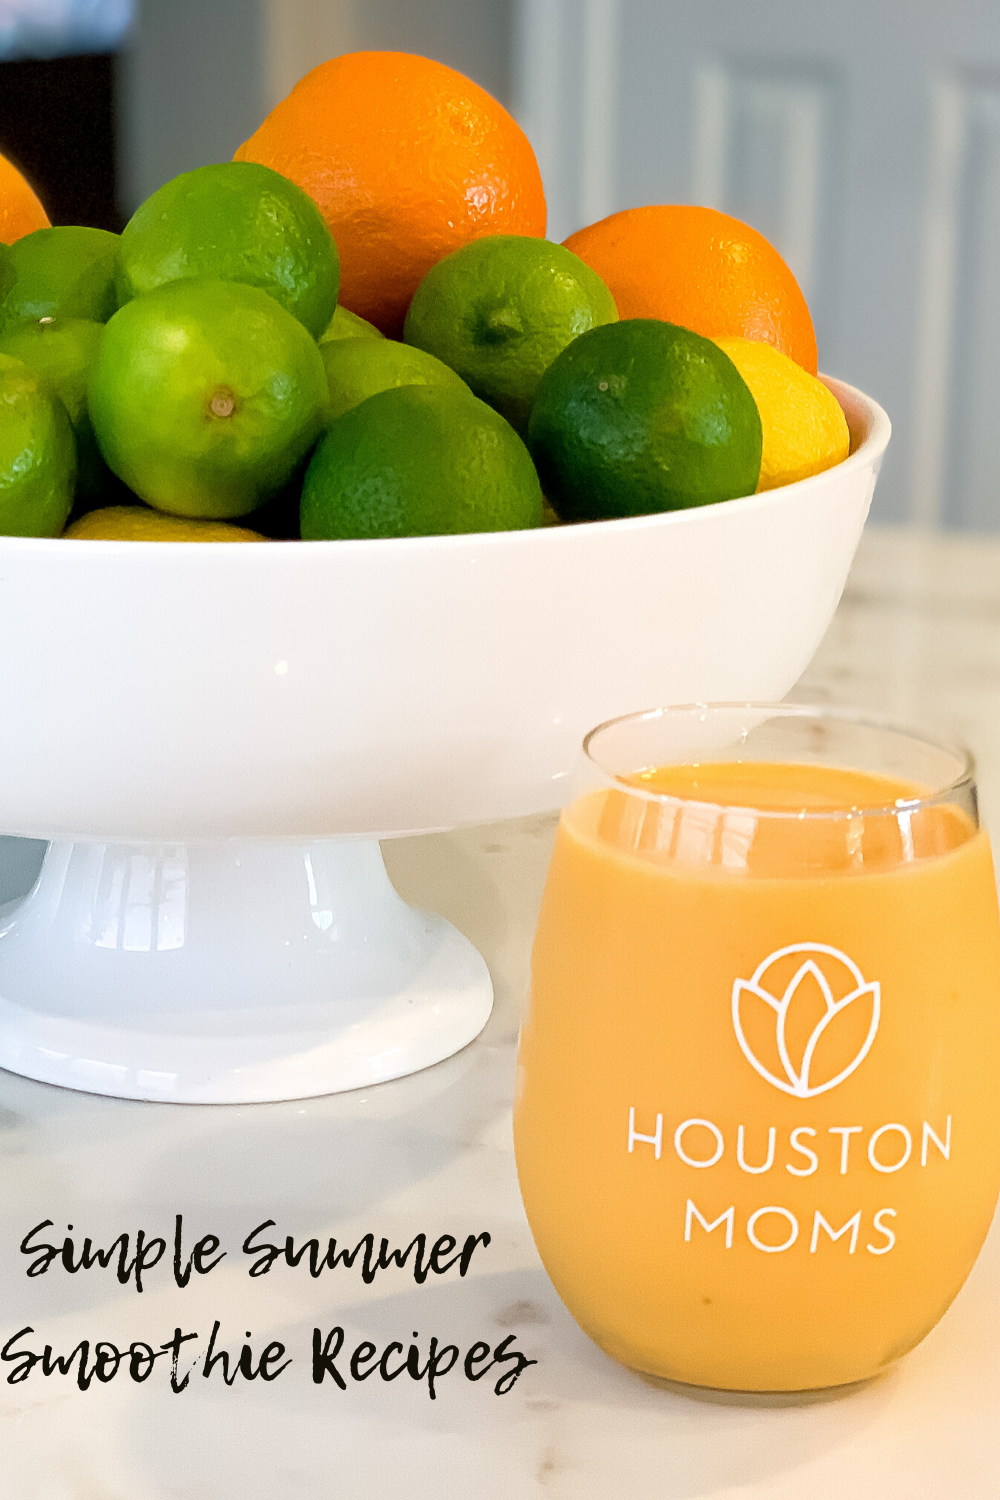 Houston Moms "Simple Summer Smoothie Recipes" #houstonmoms #houstonmomsblog #momsaroundhouston